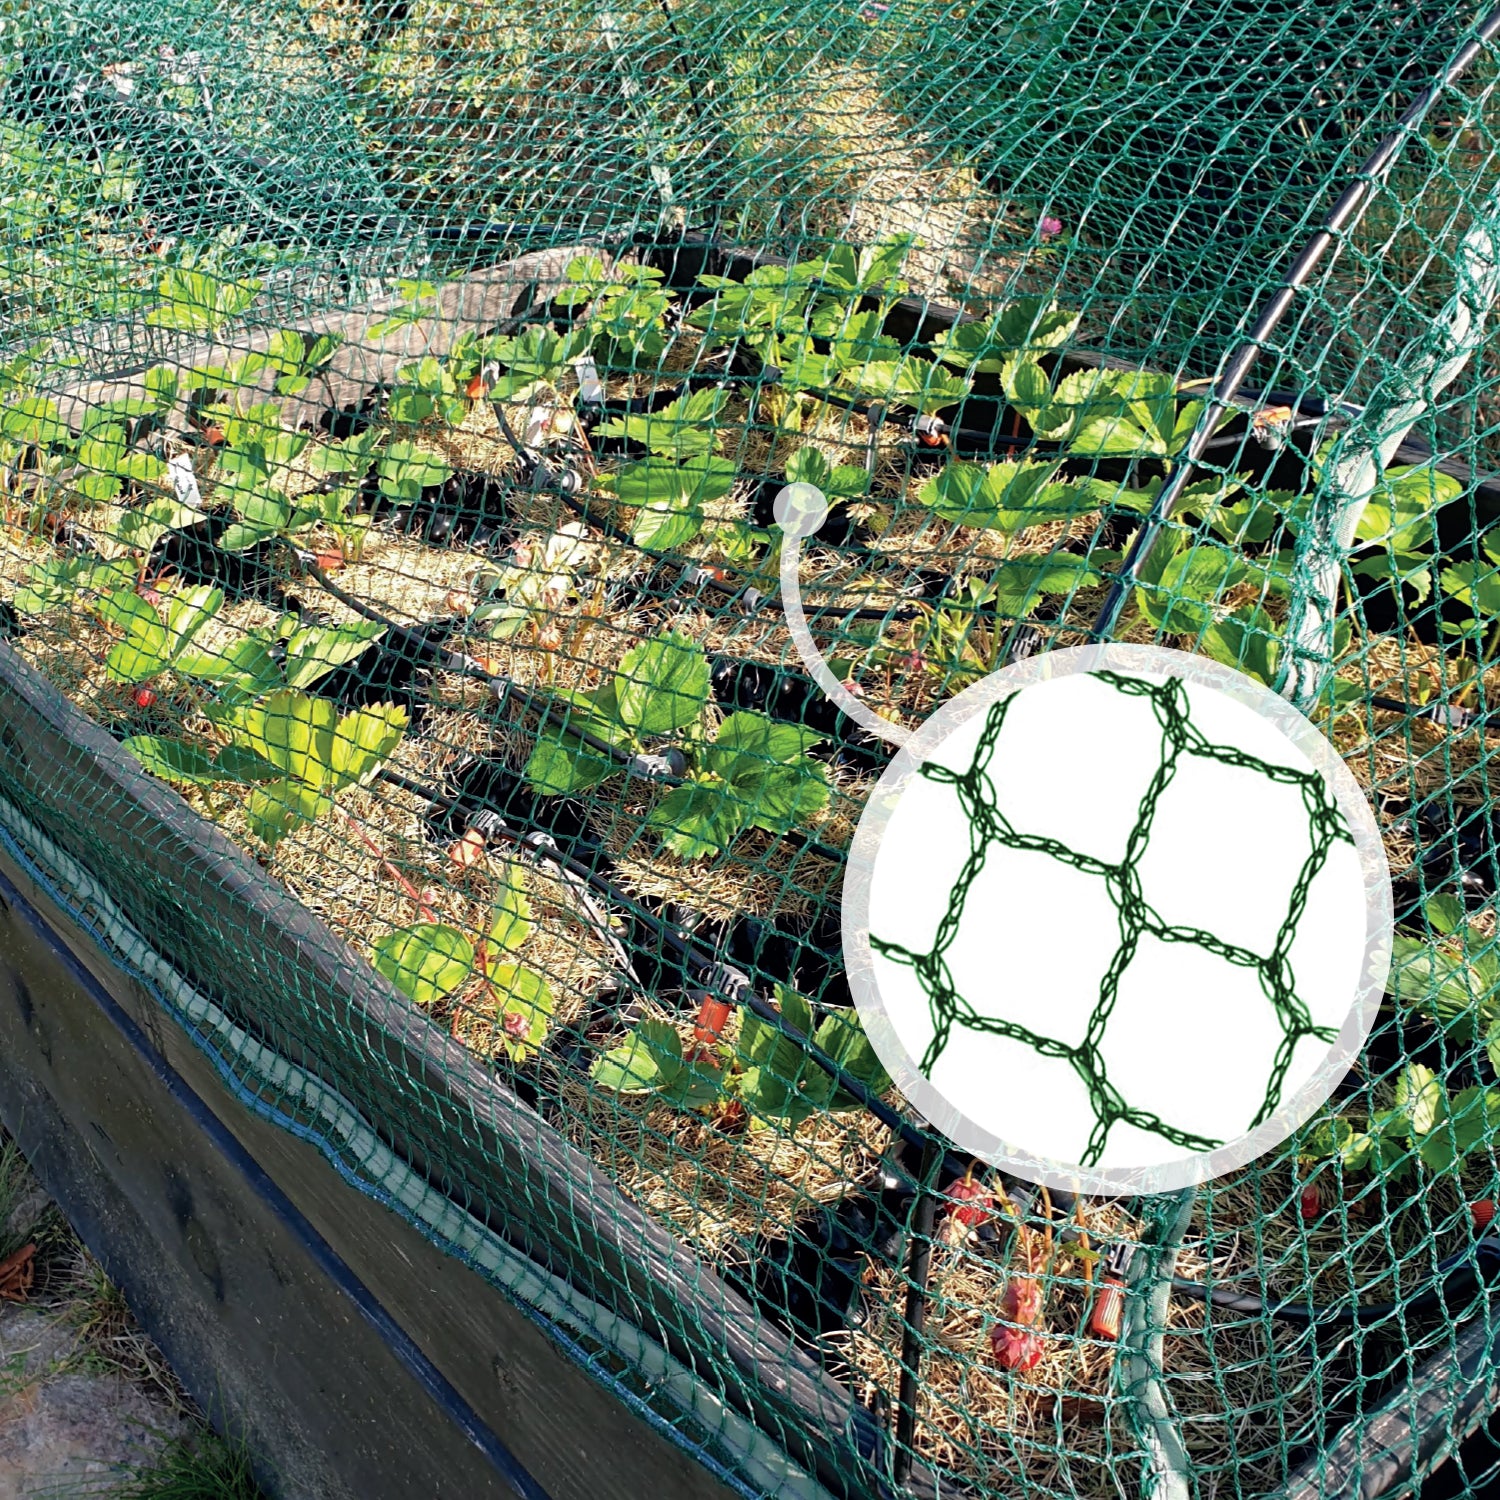 Secure Your Garden: Netting Kit with Tie Cables - UK